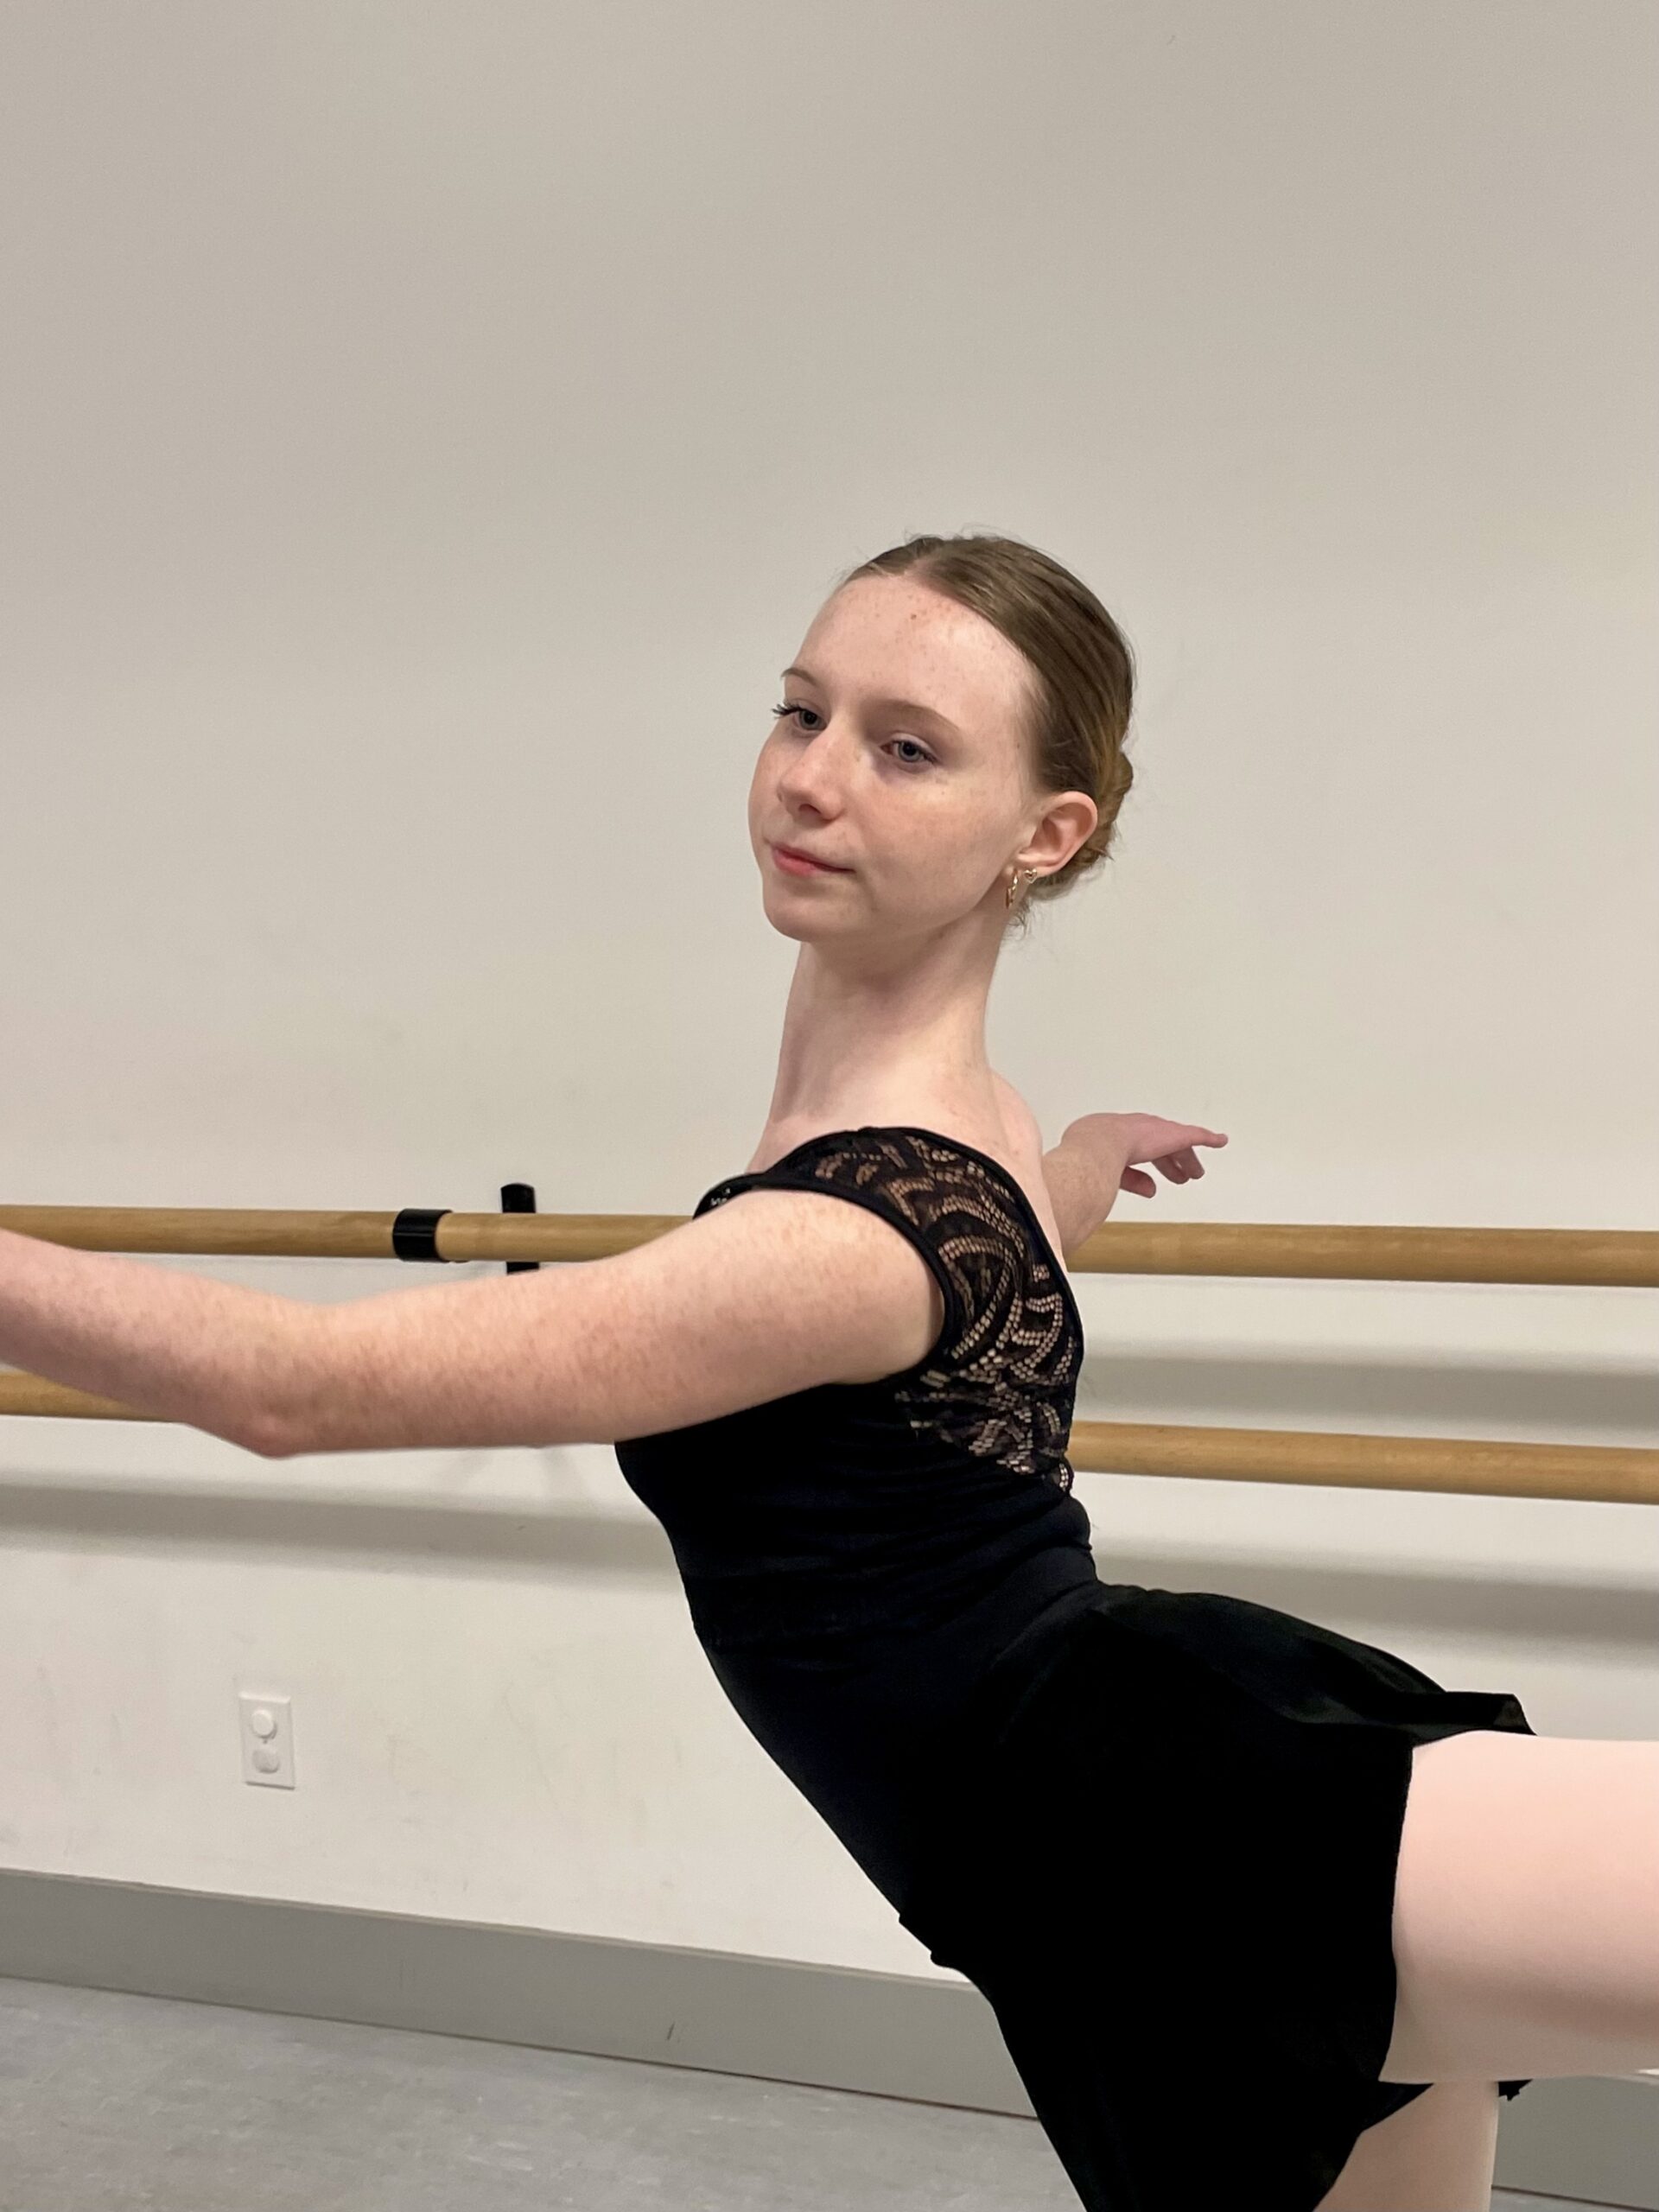 Maya Leathers has overcome several challenges, including a recent diagnosis of Tourette's Syndrome, and will share the role of the Sugar Plum Fairy in an upcoming production of the Nutcracker.